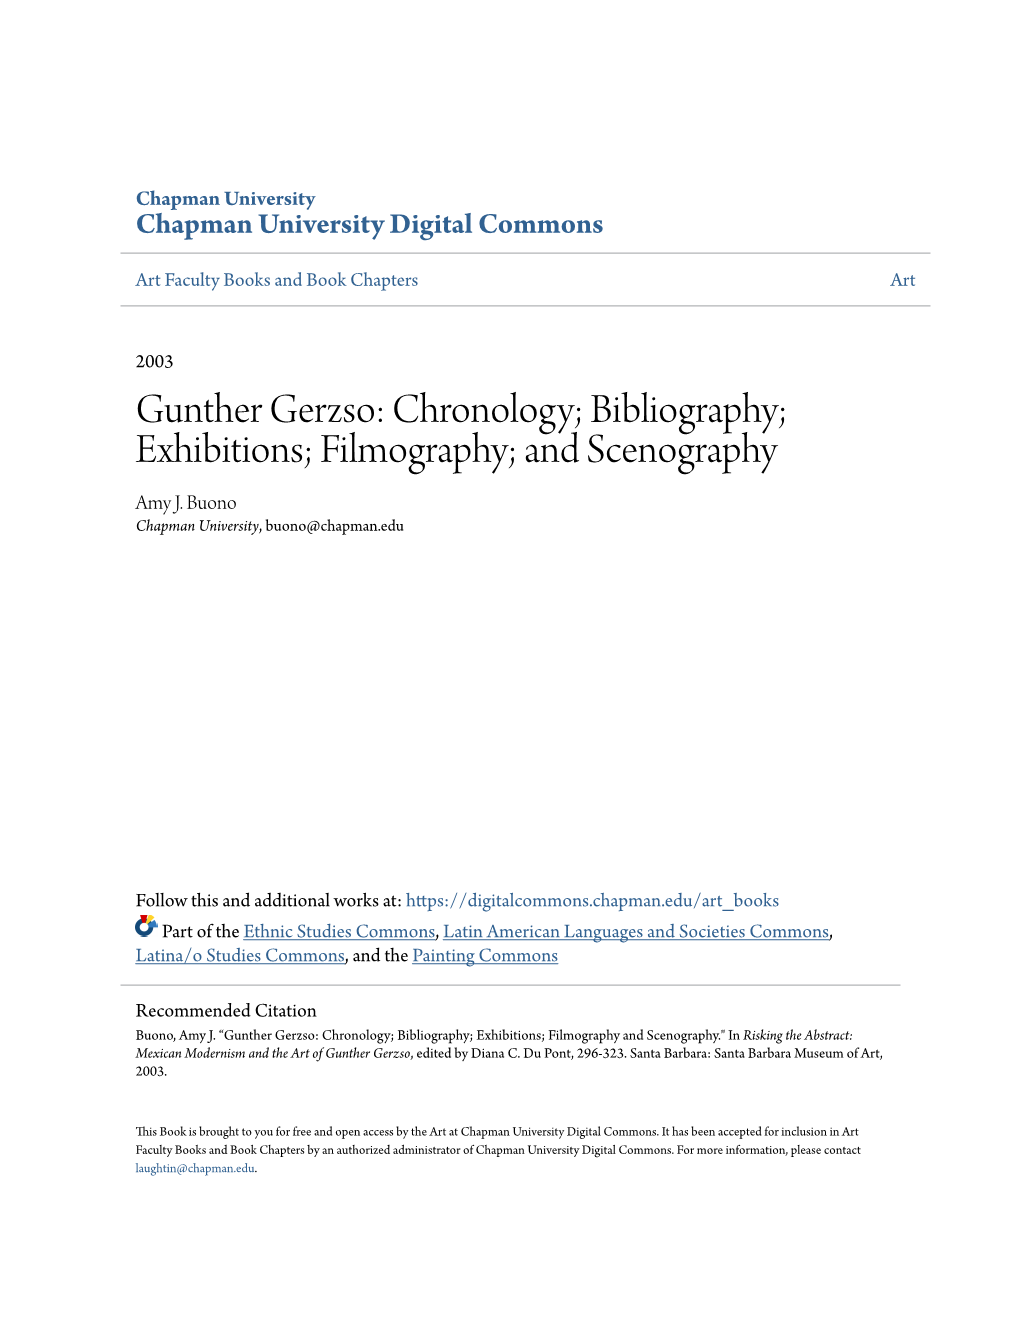 Gunther Gerzso: Chronology; Bibliography; Exhibitions; Filmography; and Scenography Amy J